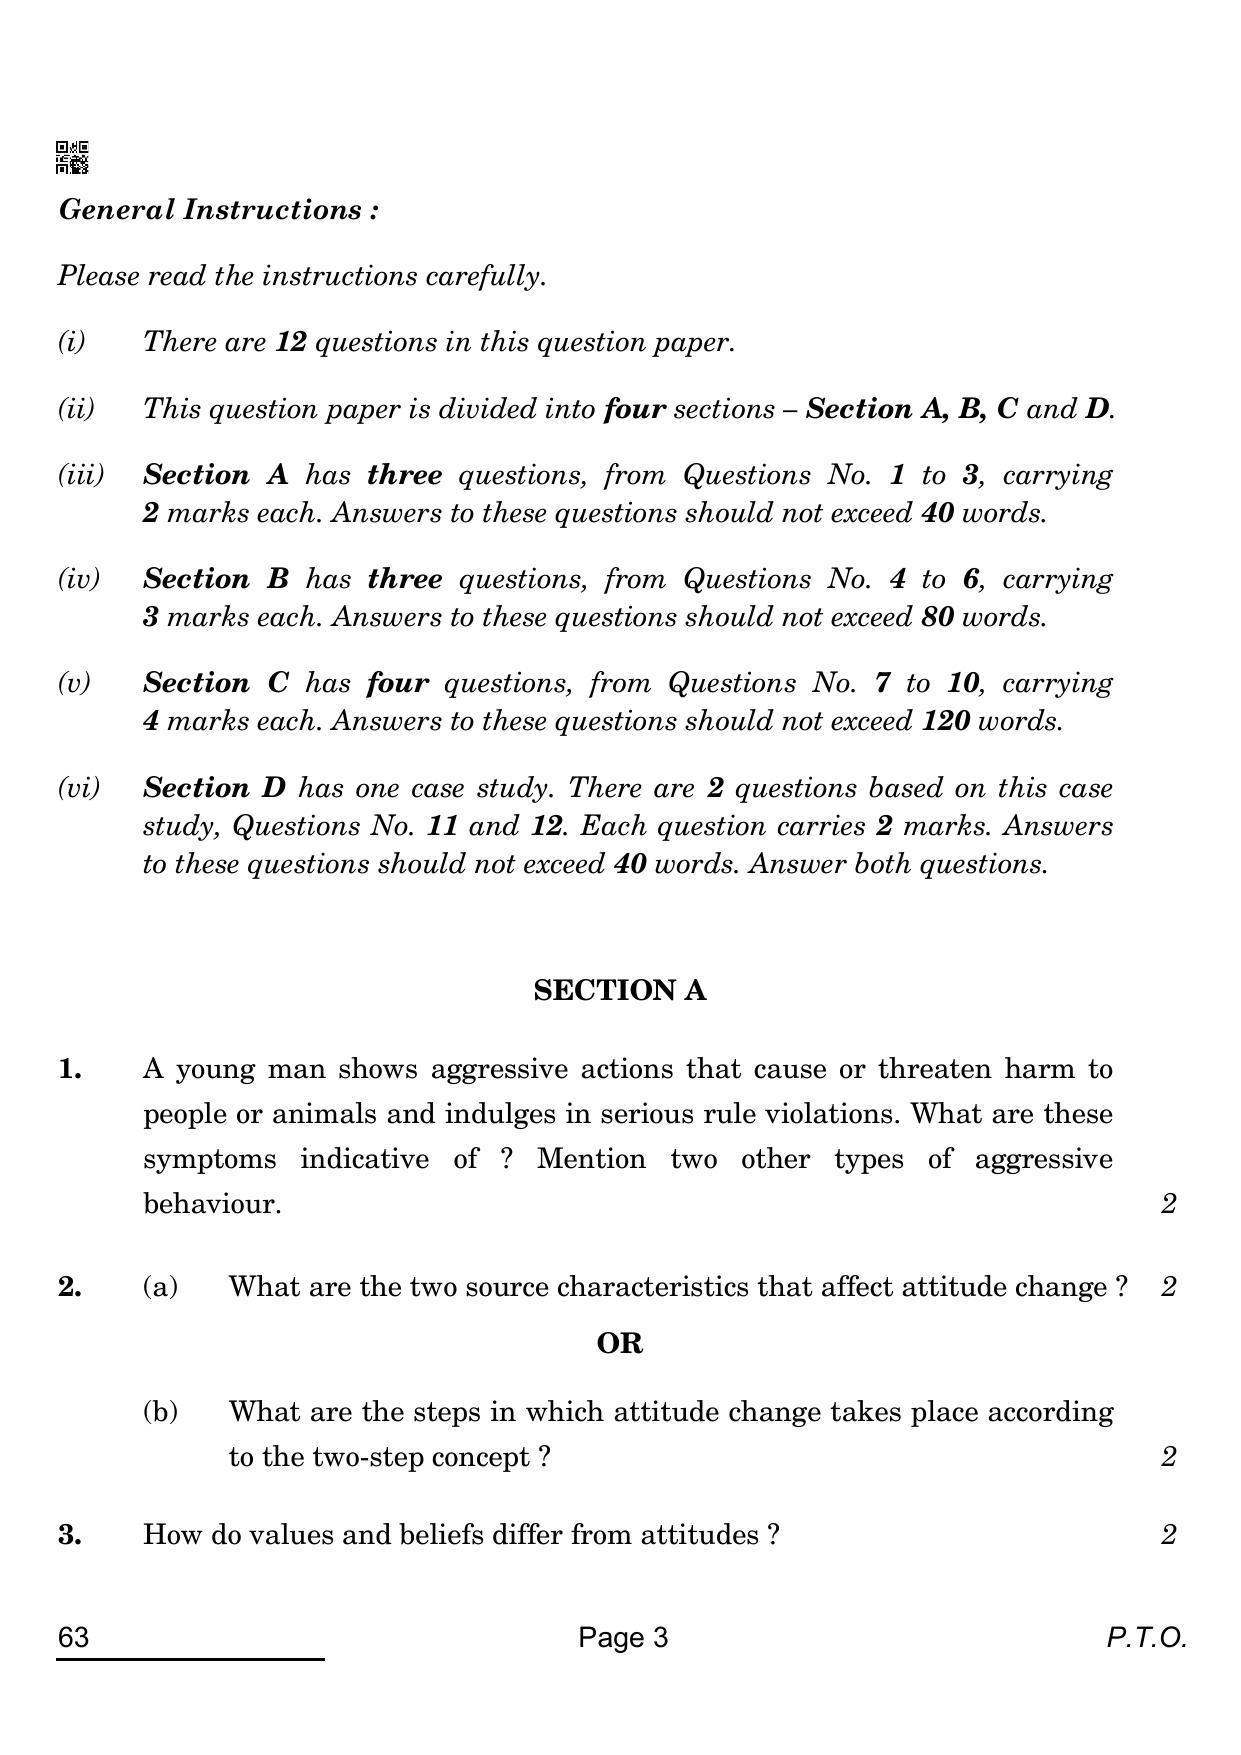 CBSE Class 12 63 Psychology 2022 Compartment Question Paper - Page 3